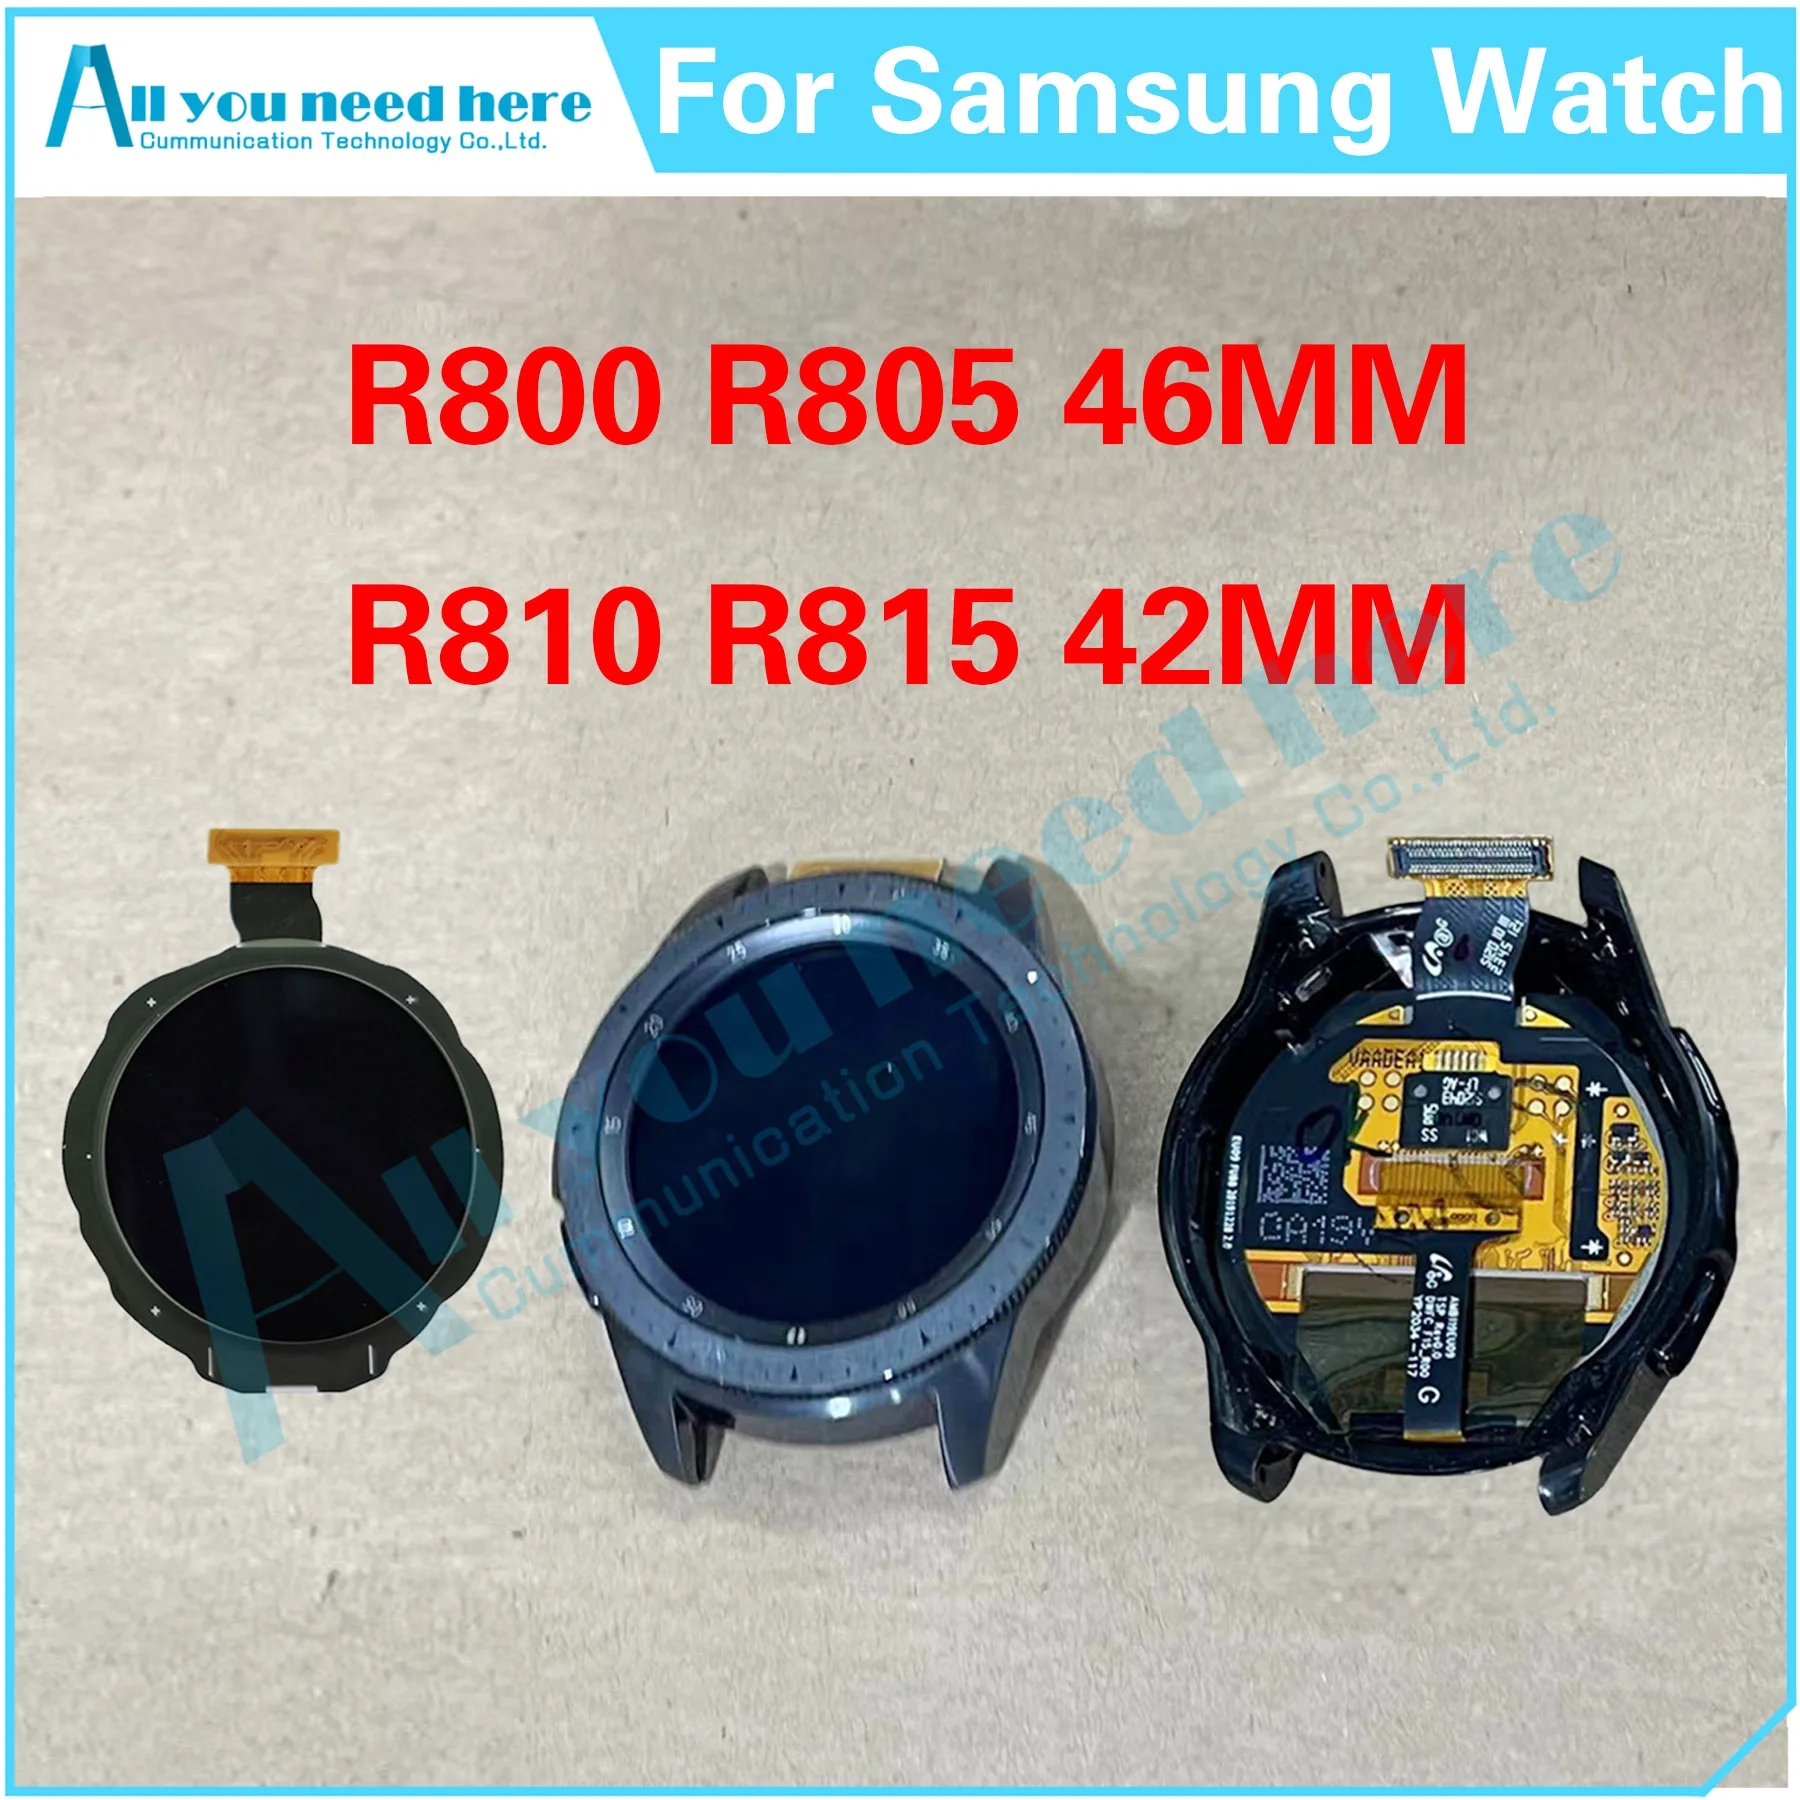 

Original For Samsung Galaxy Watch R800 R805 46MM / R810 R815 42MM LCD Display Touch Screen Digitizer Assembly Replacement